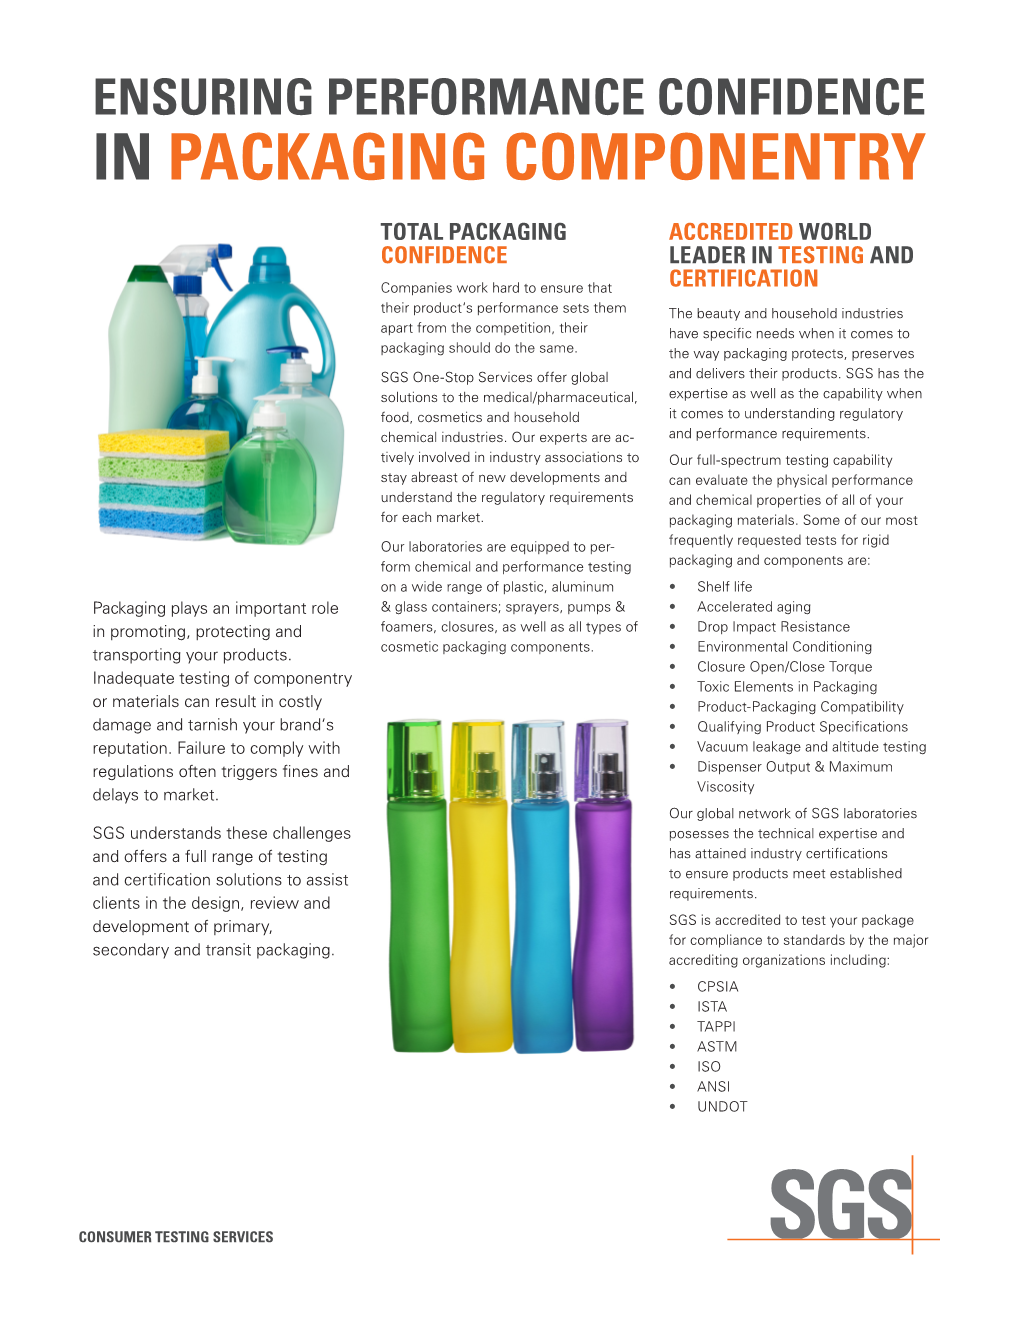 In Packaging Componentry